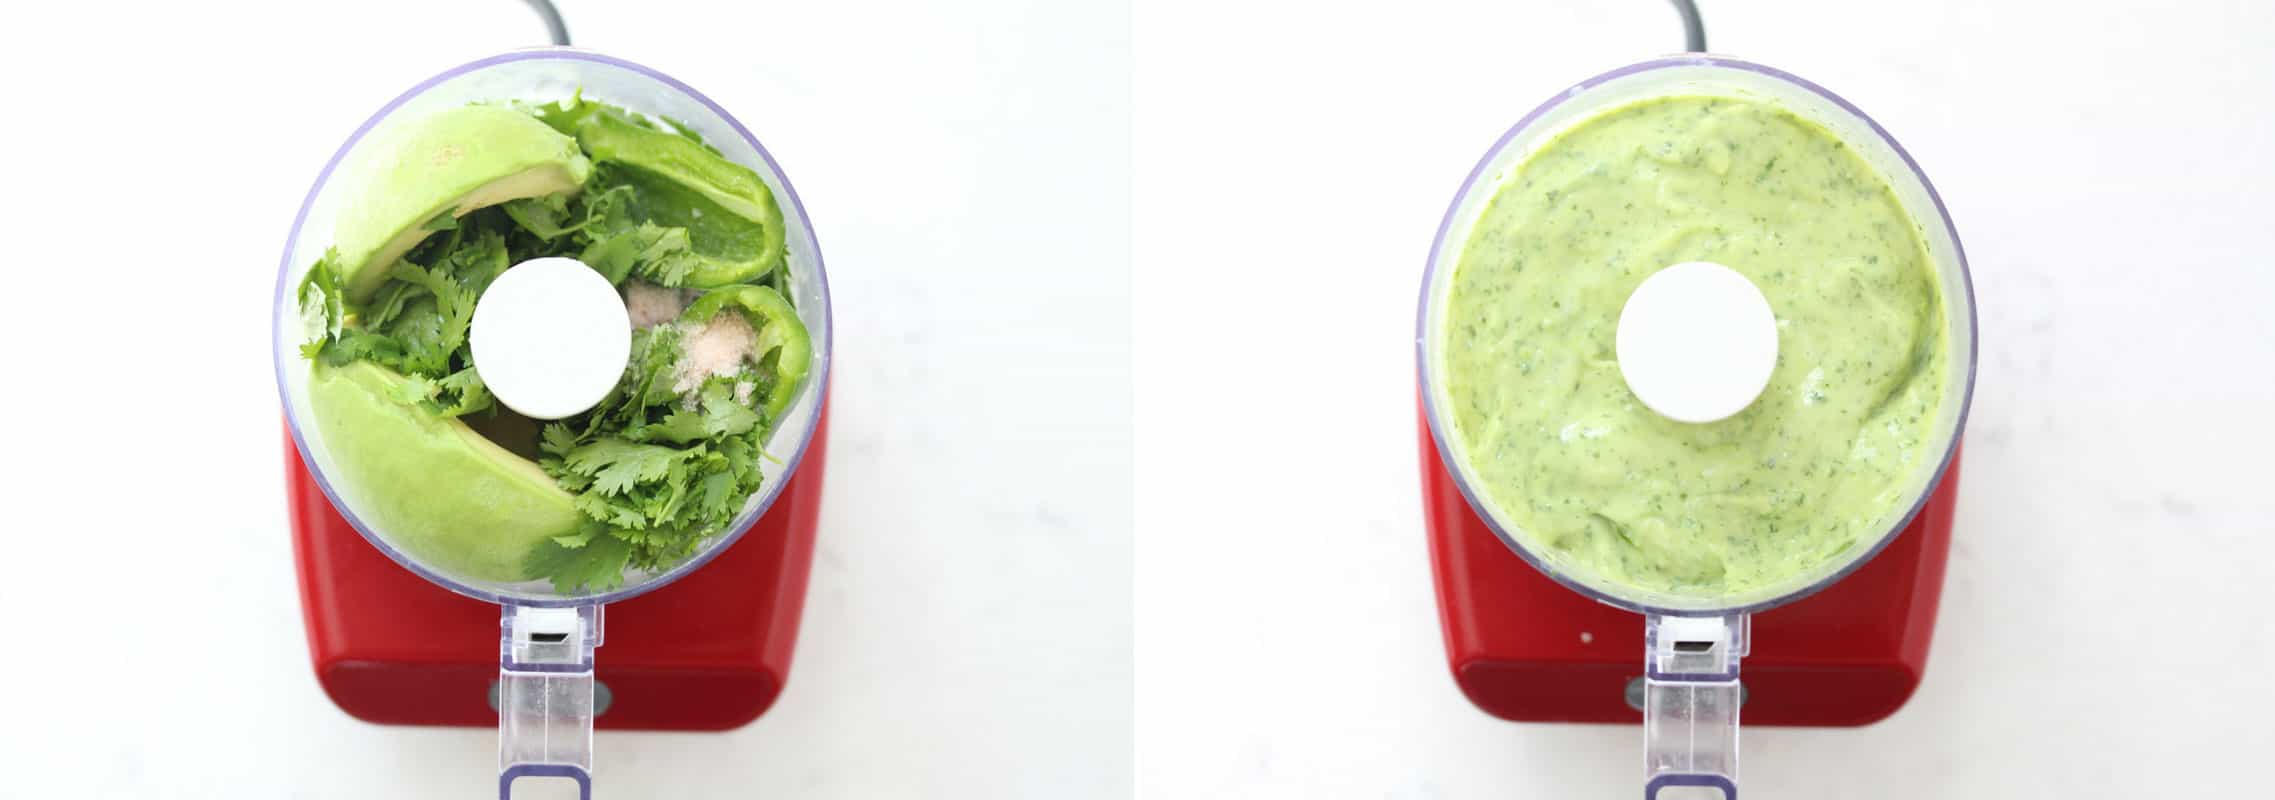 Ingredients in food processor next to food processor with green sauce.